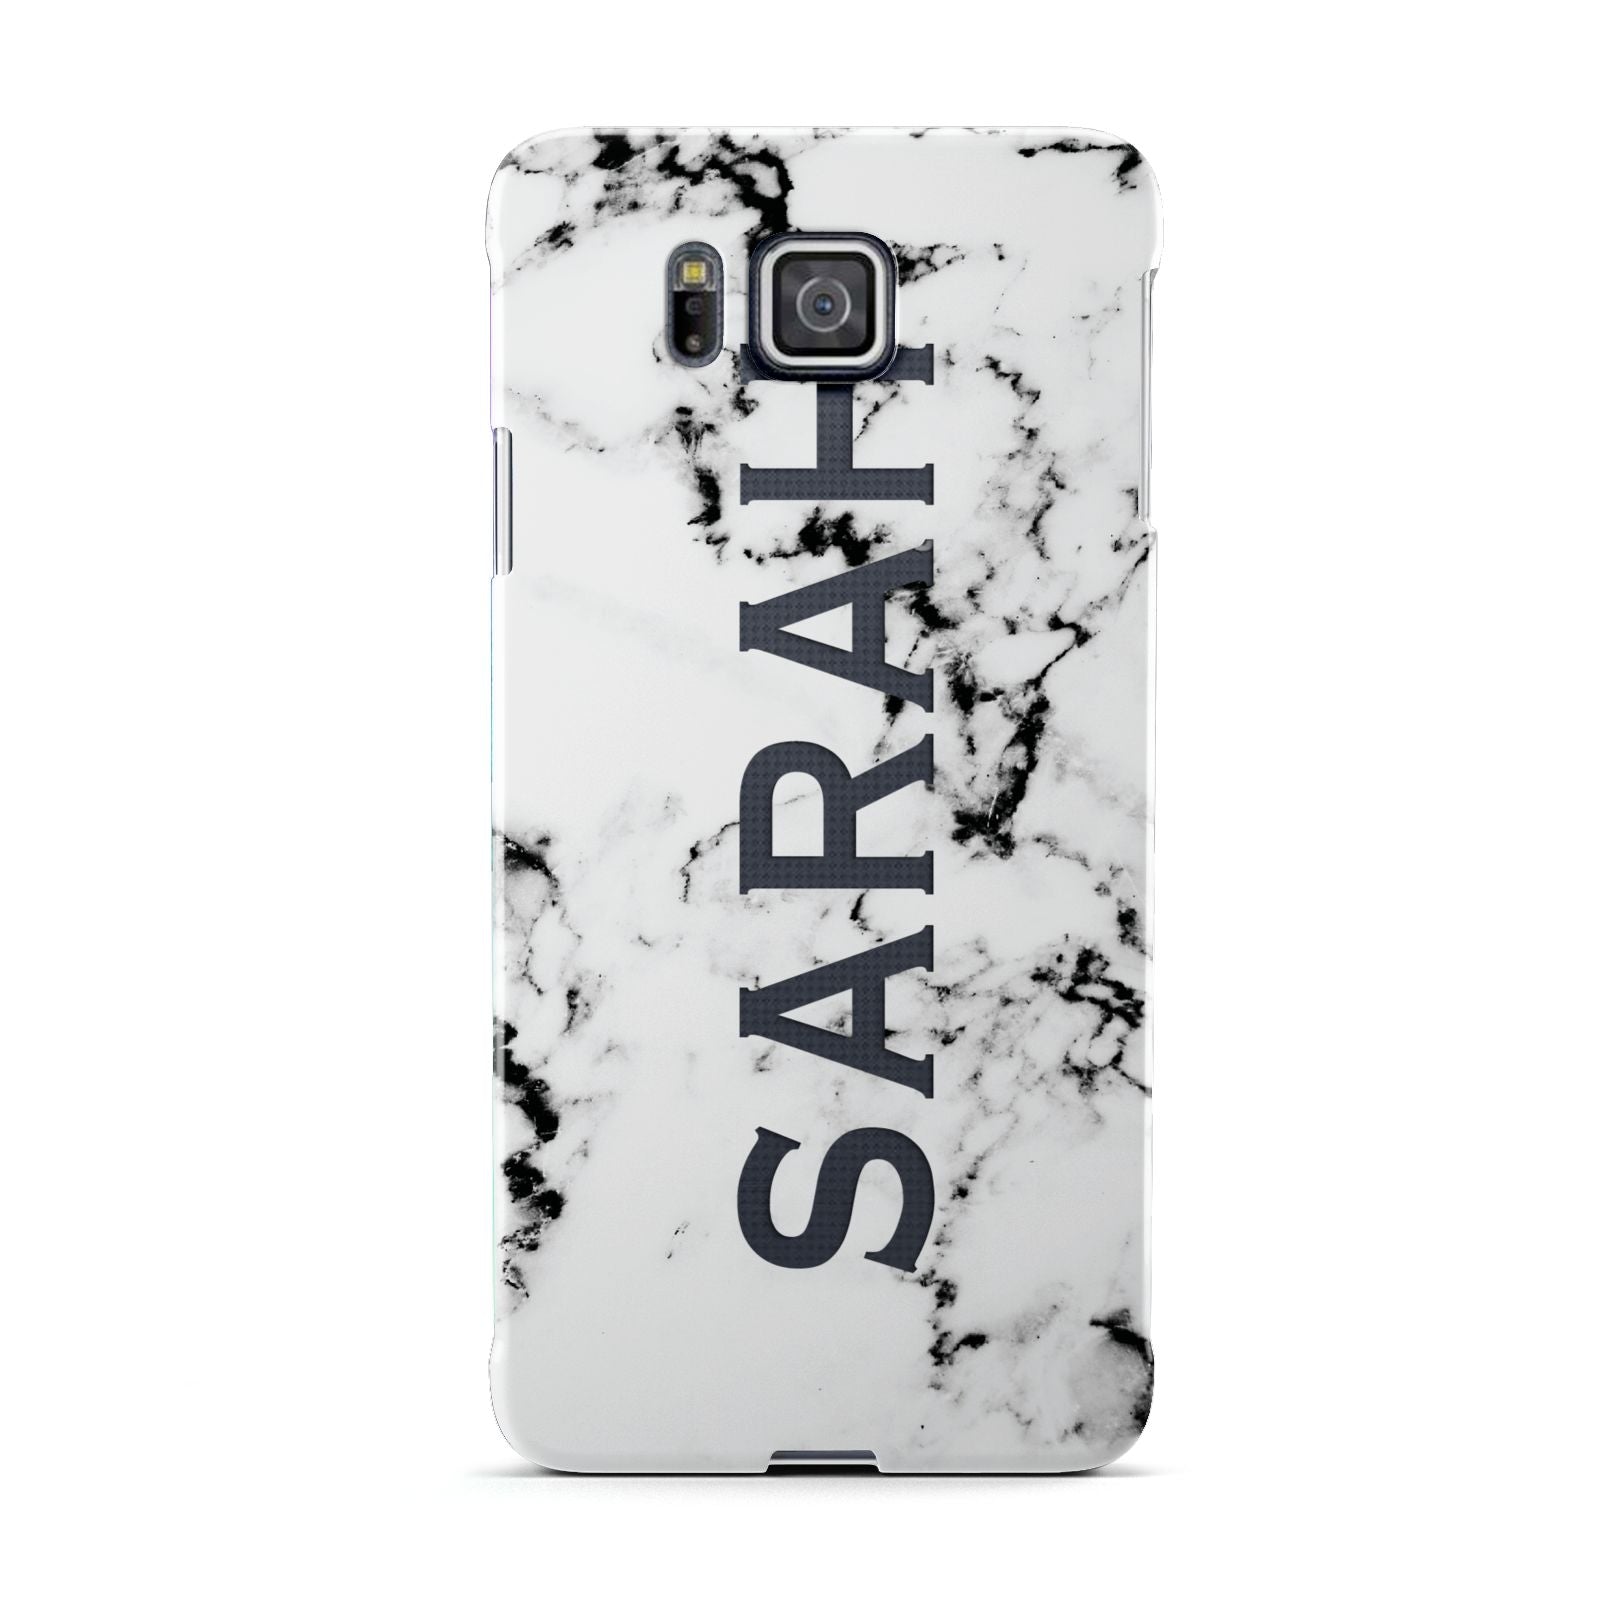 Personalised Clear Name Black White Marble Custom Samsung Galaxy Alpha Case